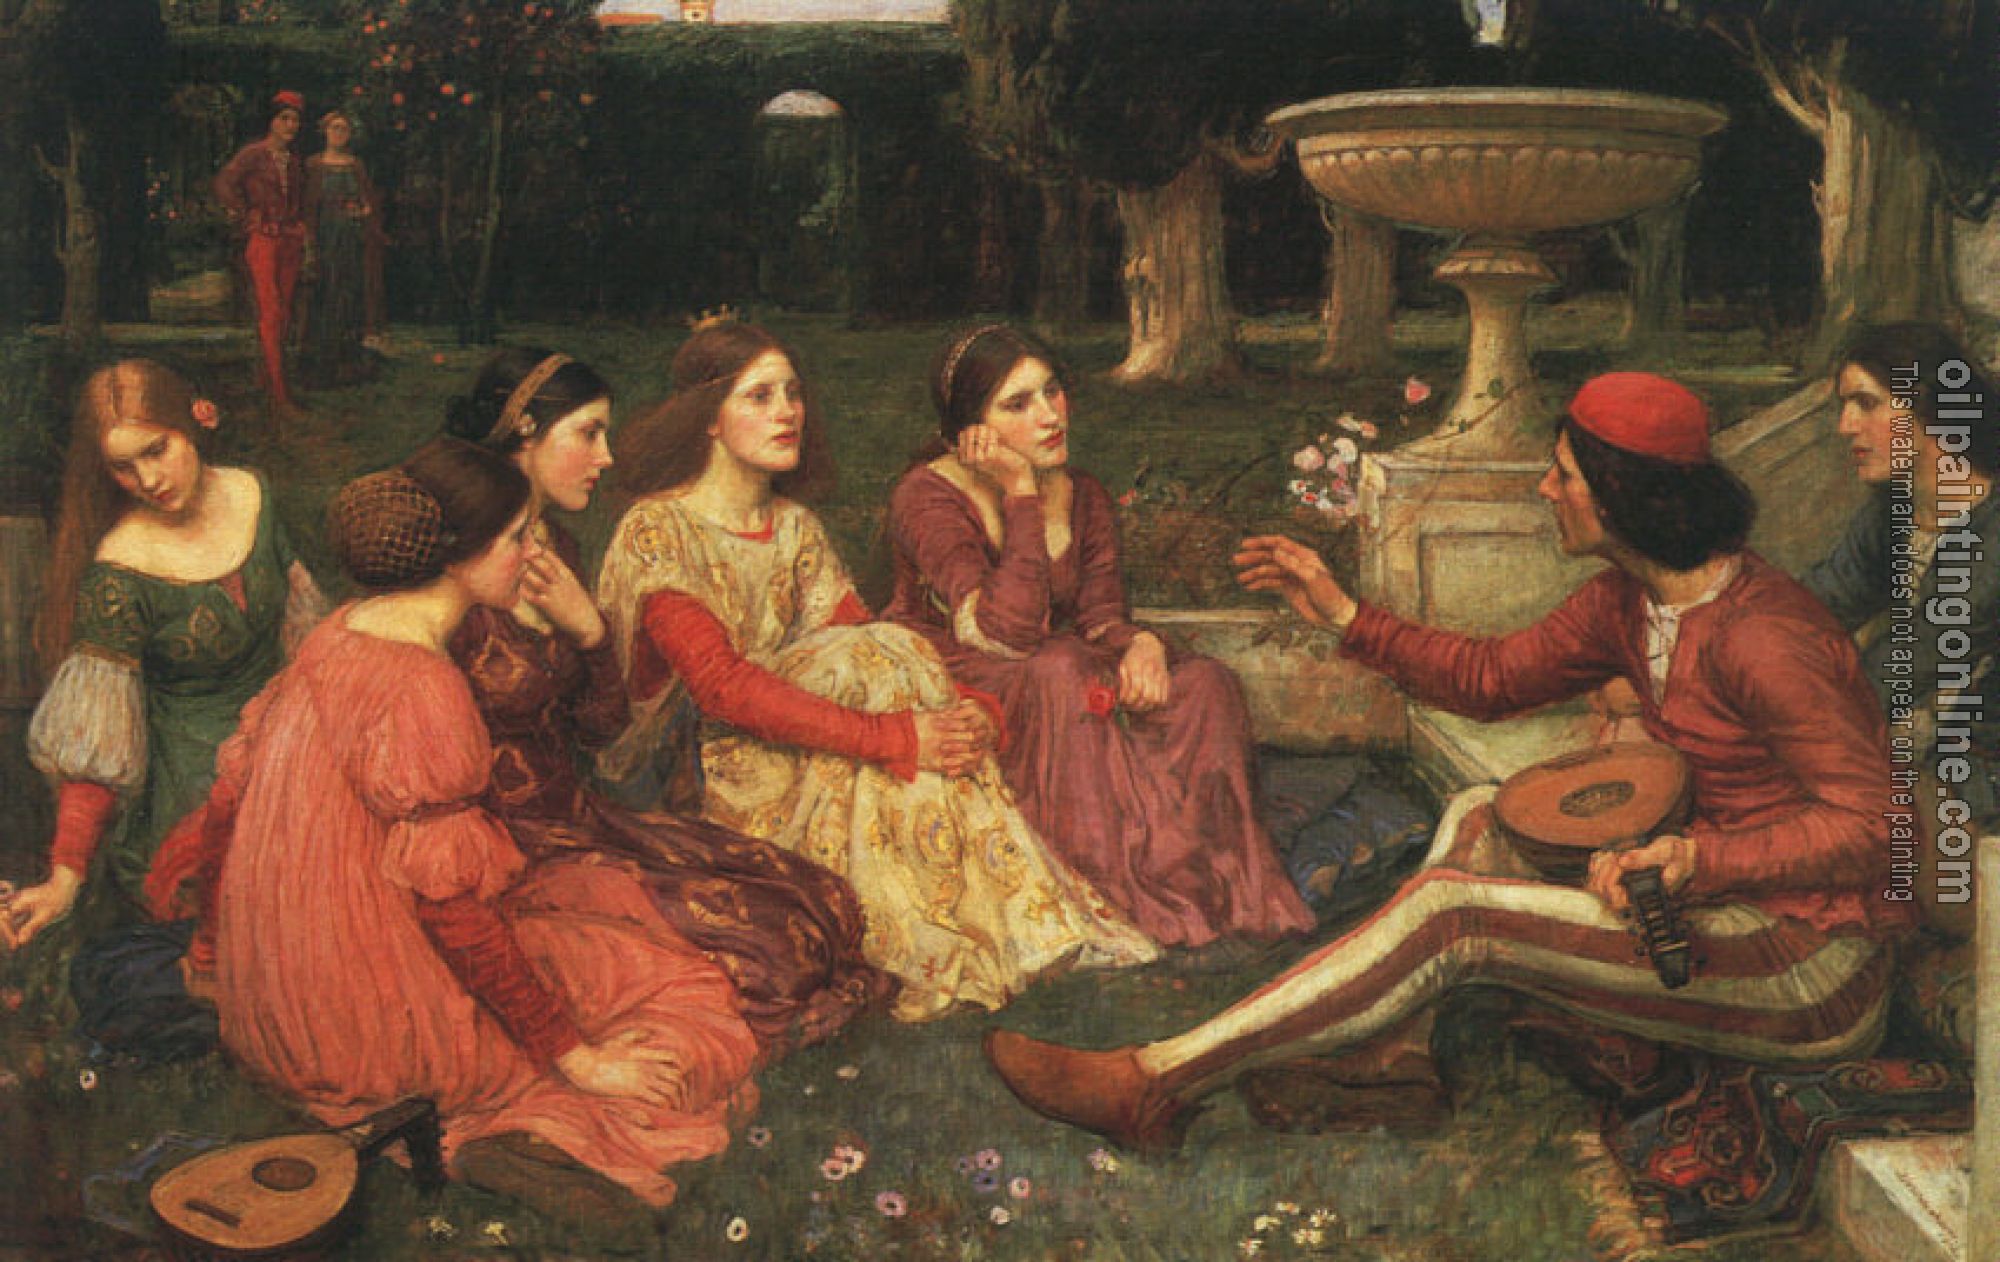 Waterhouse, John William - A Tale from Decameron